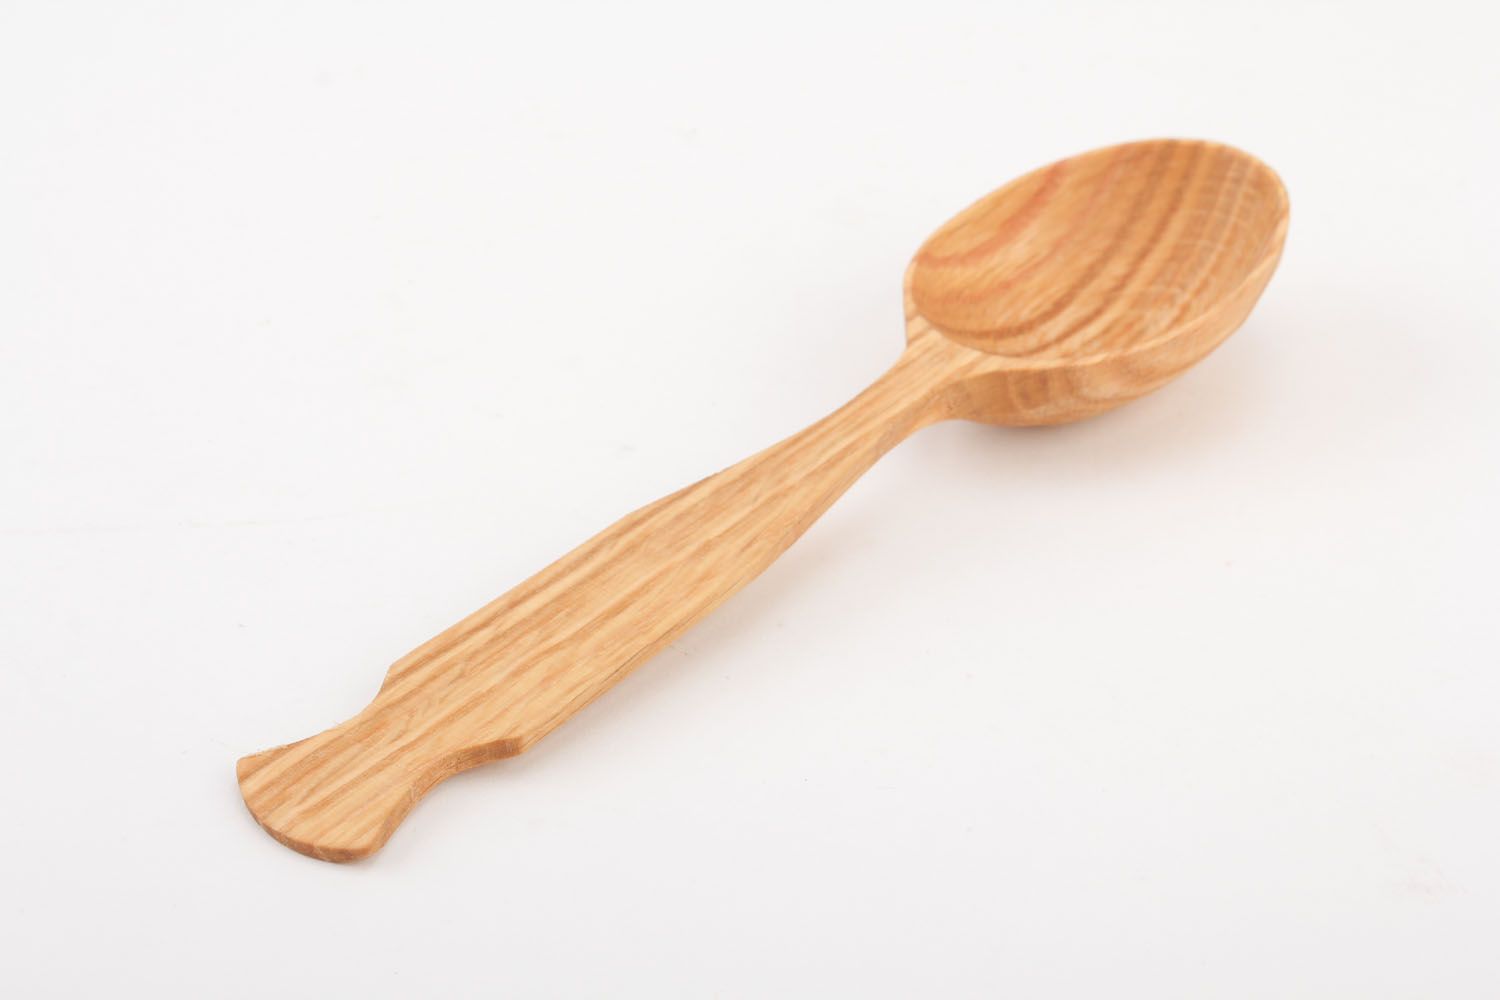 Homemade wooden spoon photo 3